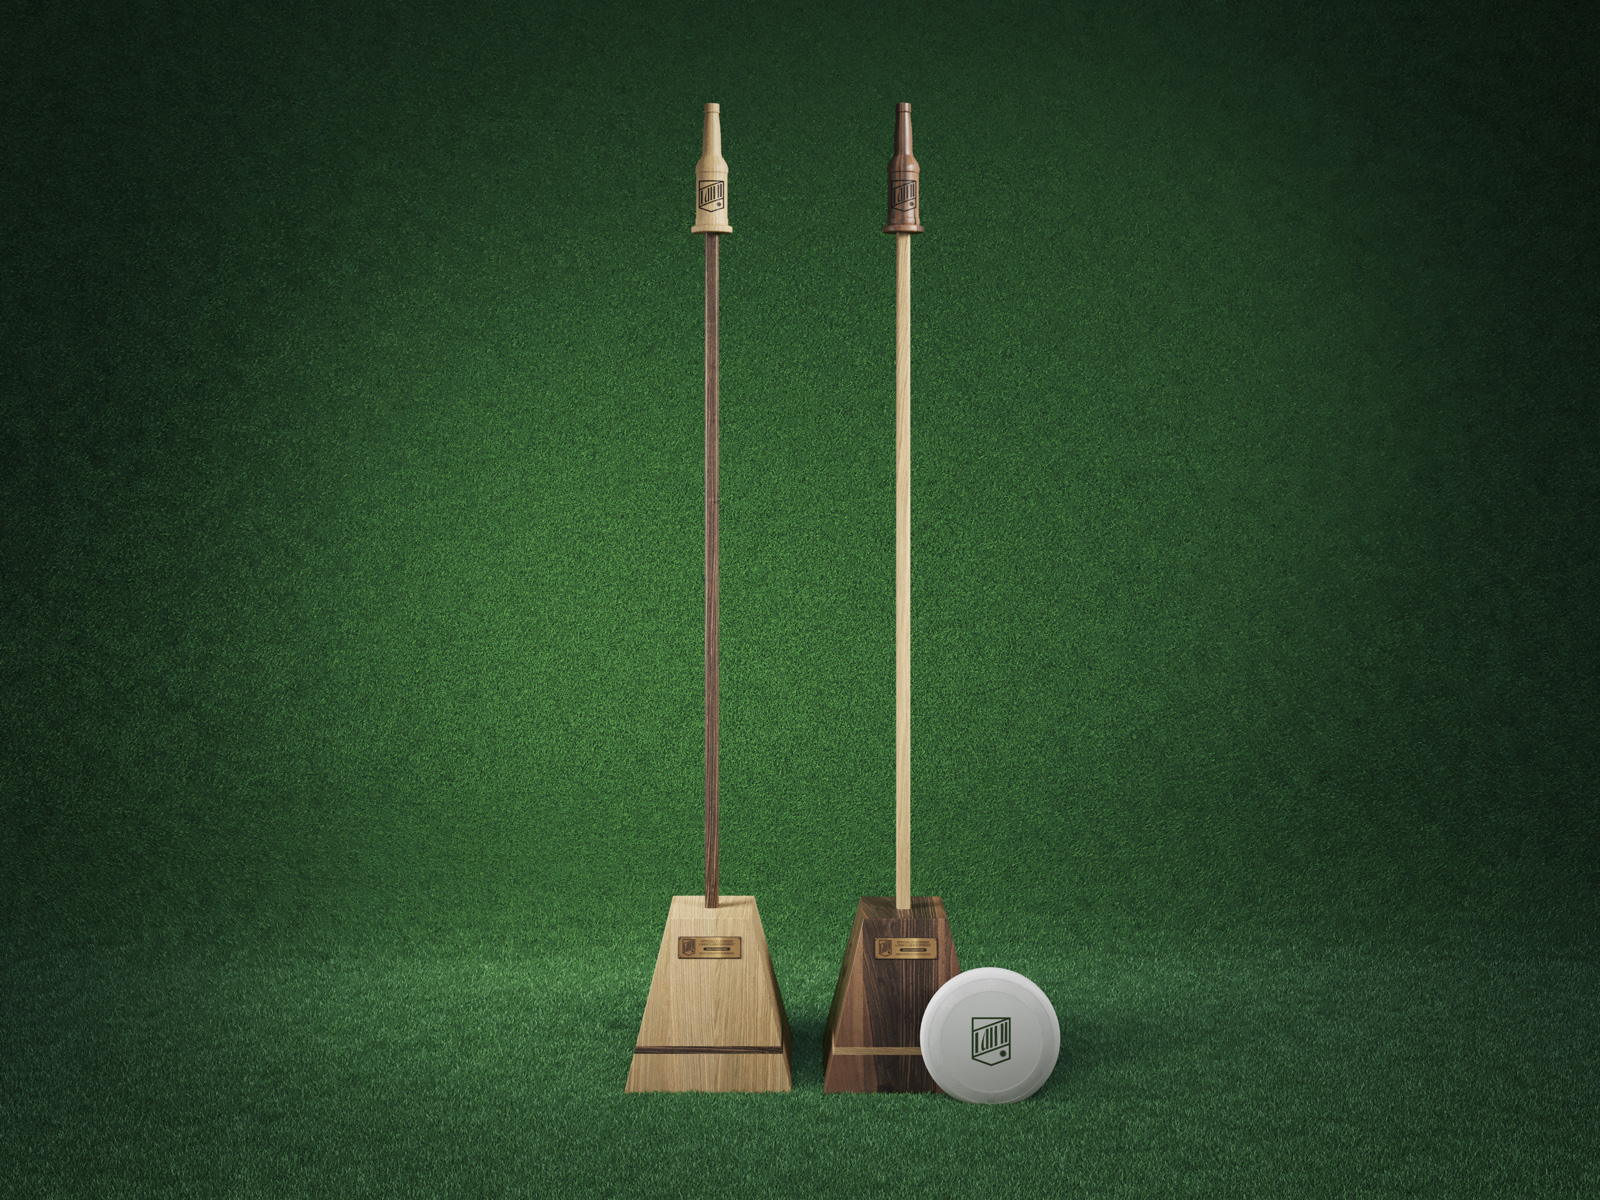 A set of gaming of equipment for the game beersbee, made of rich dark and light wood, set against a green turf background.